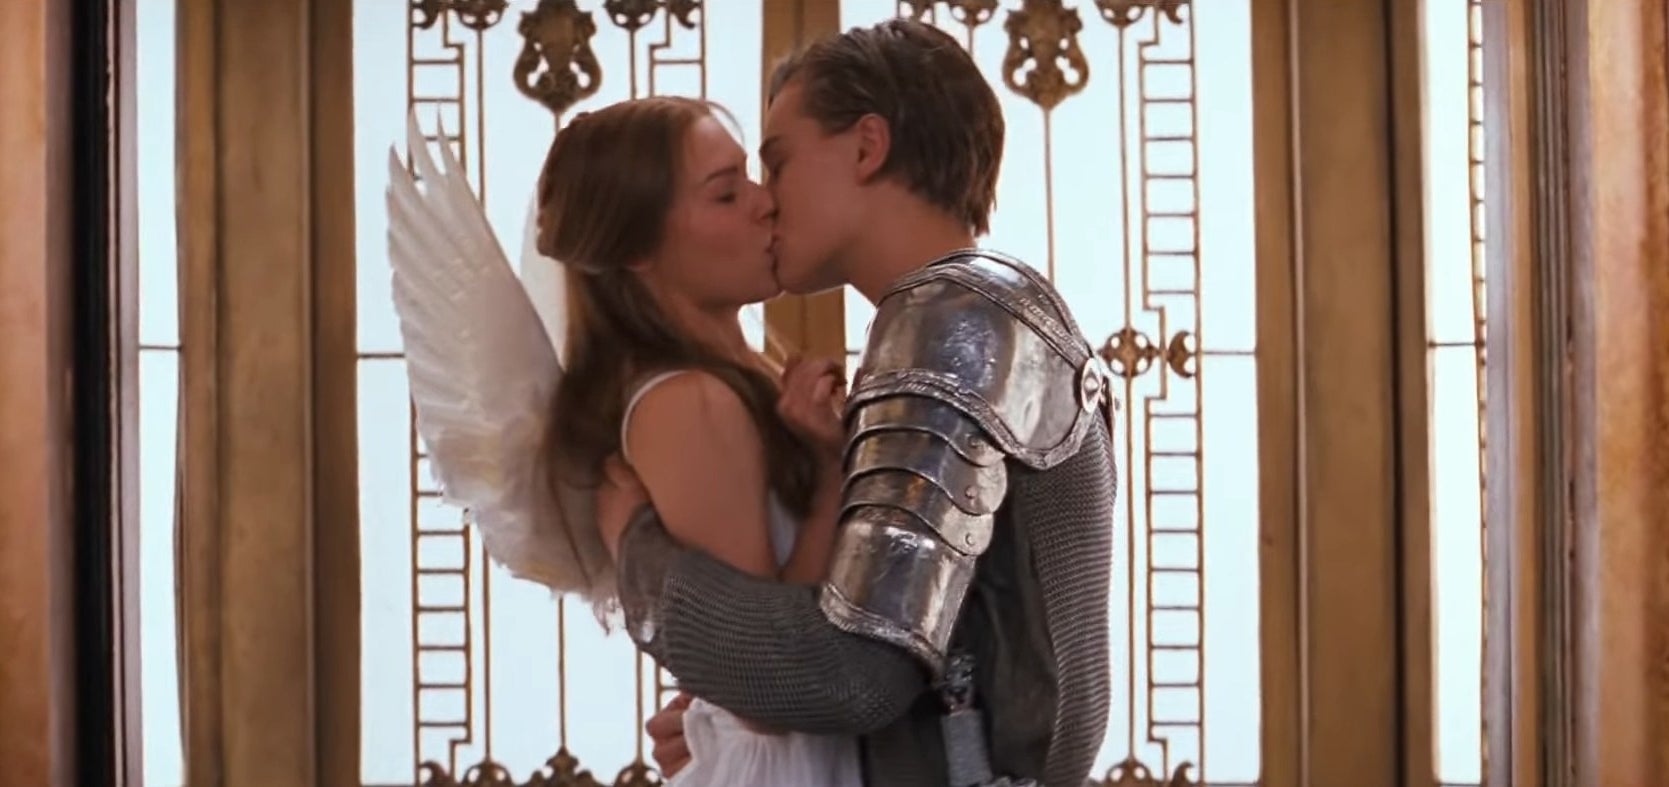 Romeo and Juliet kissing in &quot;Romeo + Juliet&quot;